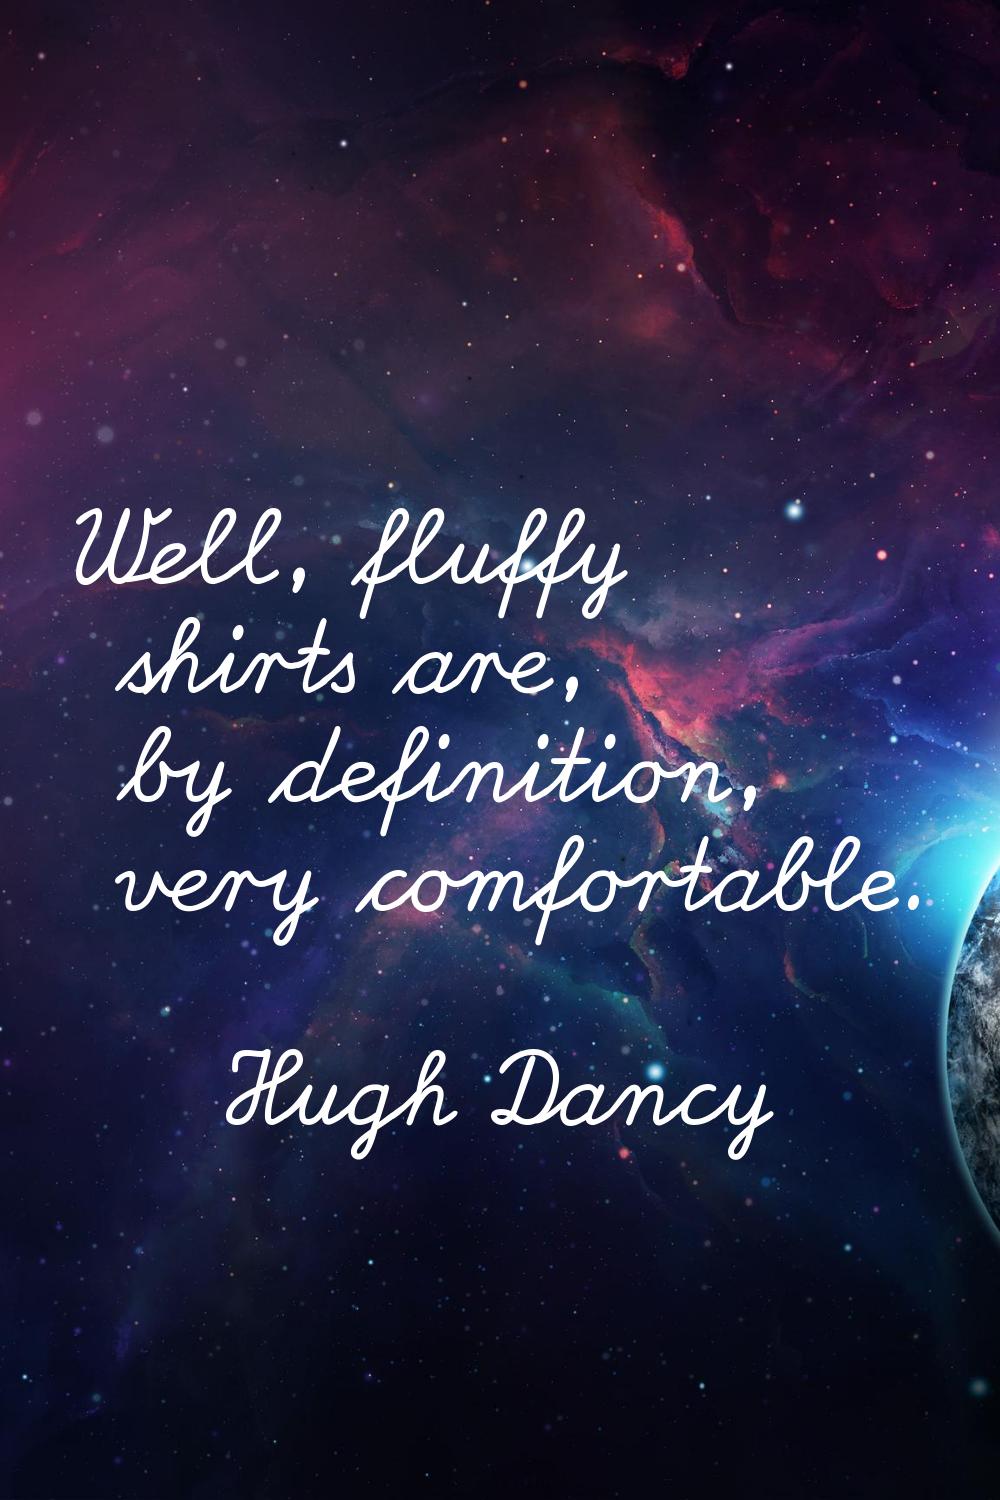 Well, fluffy shirts are, by definition, very comfortable.